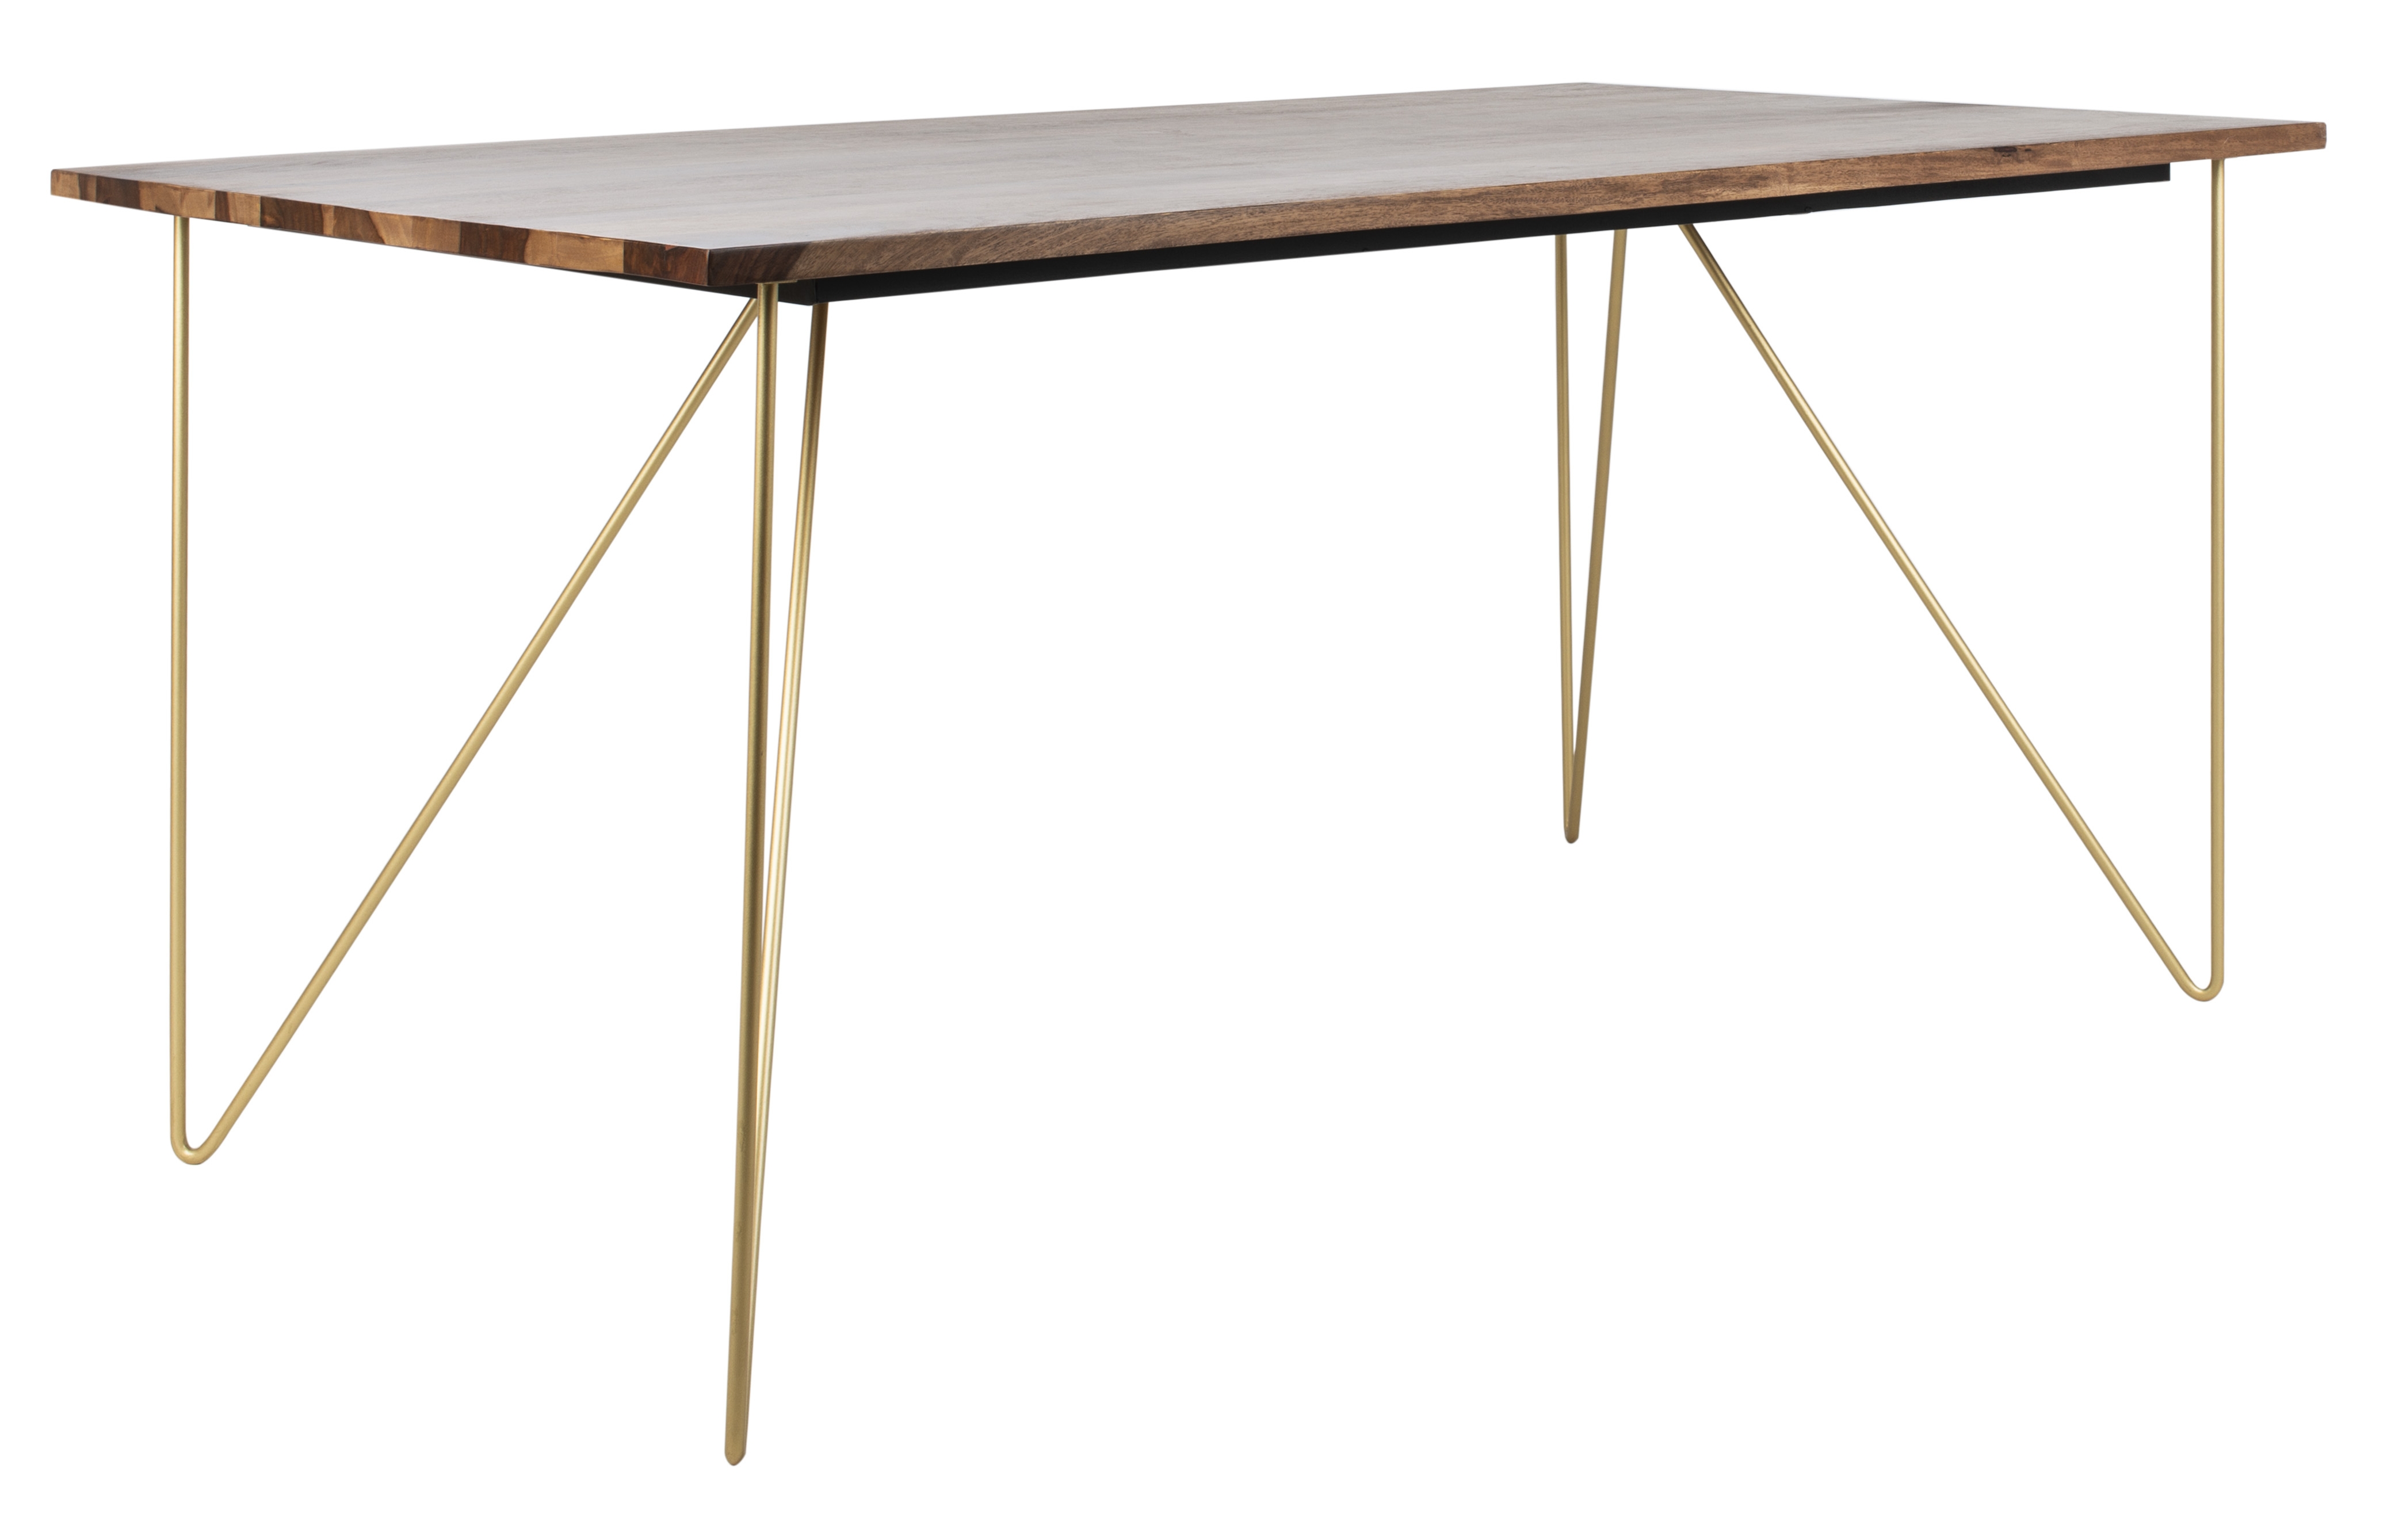 Captain Hairpin Legs Wood Dining Table - Walnut/Brass - Arlo Home - Image 1